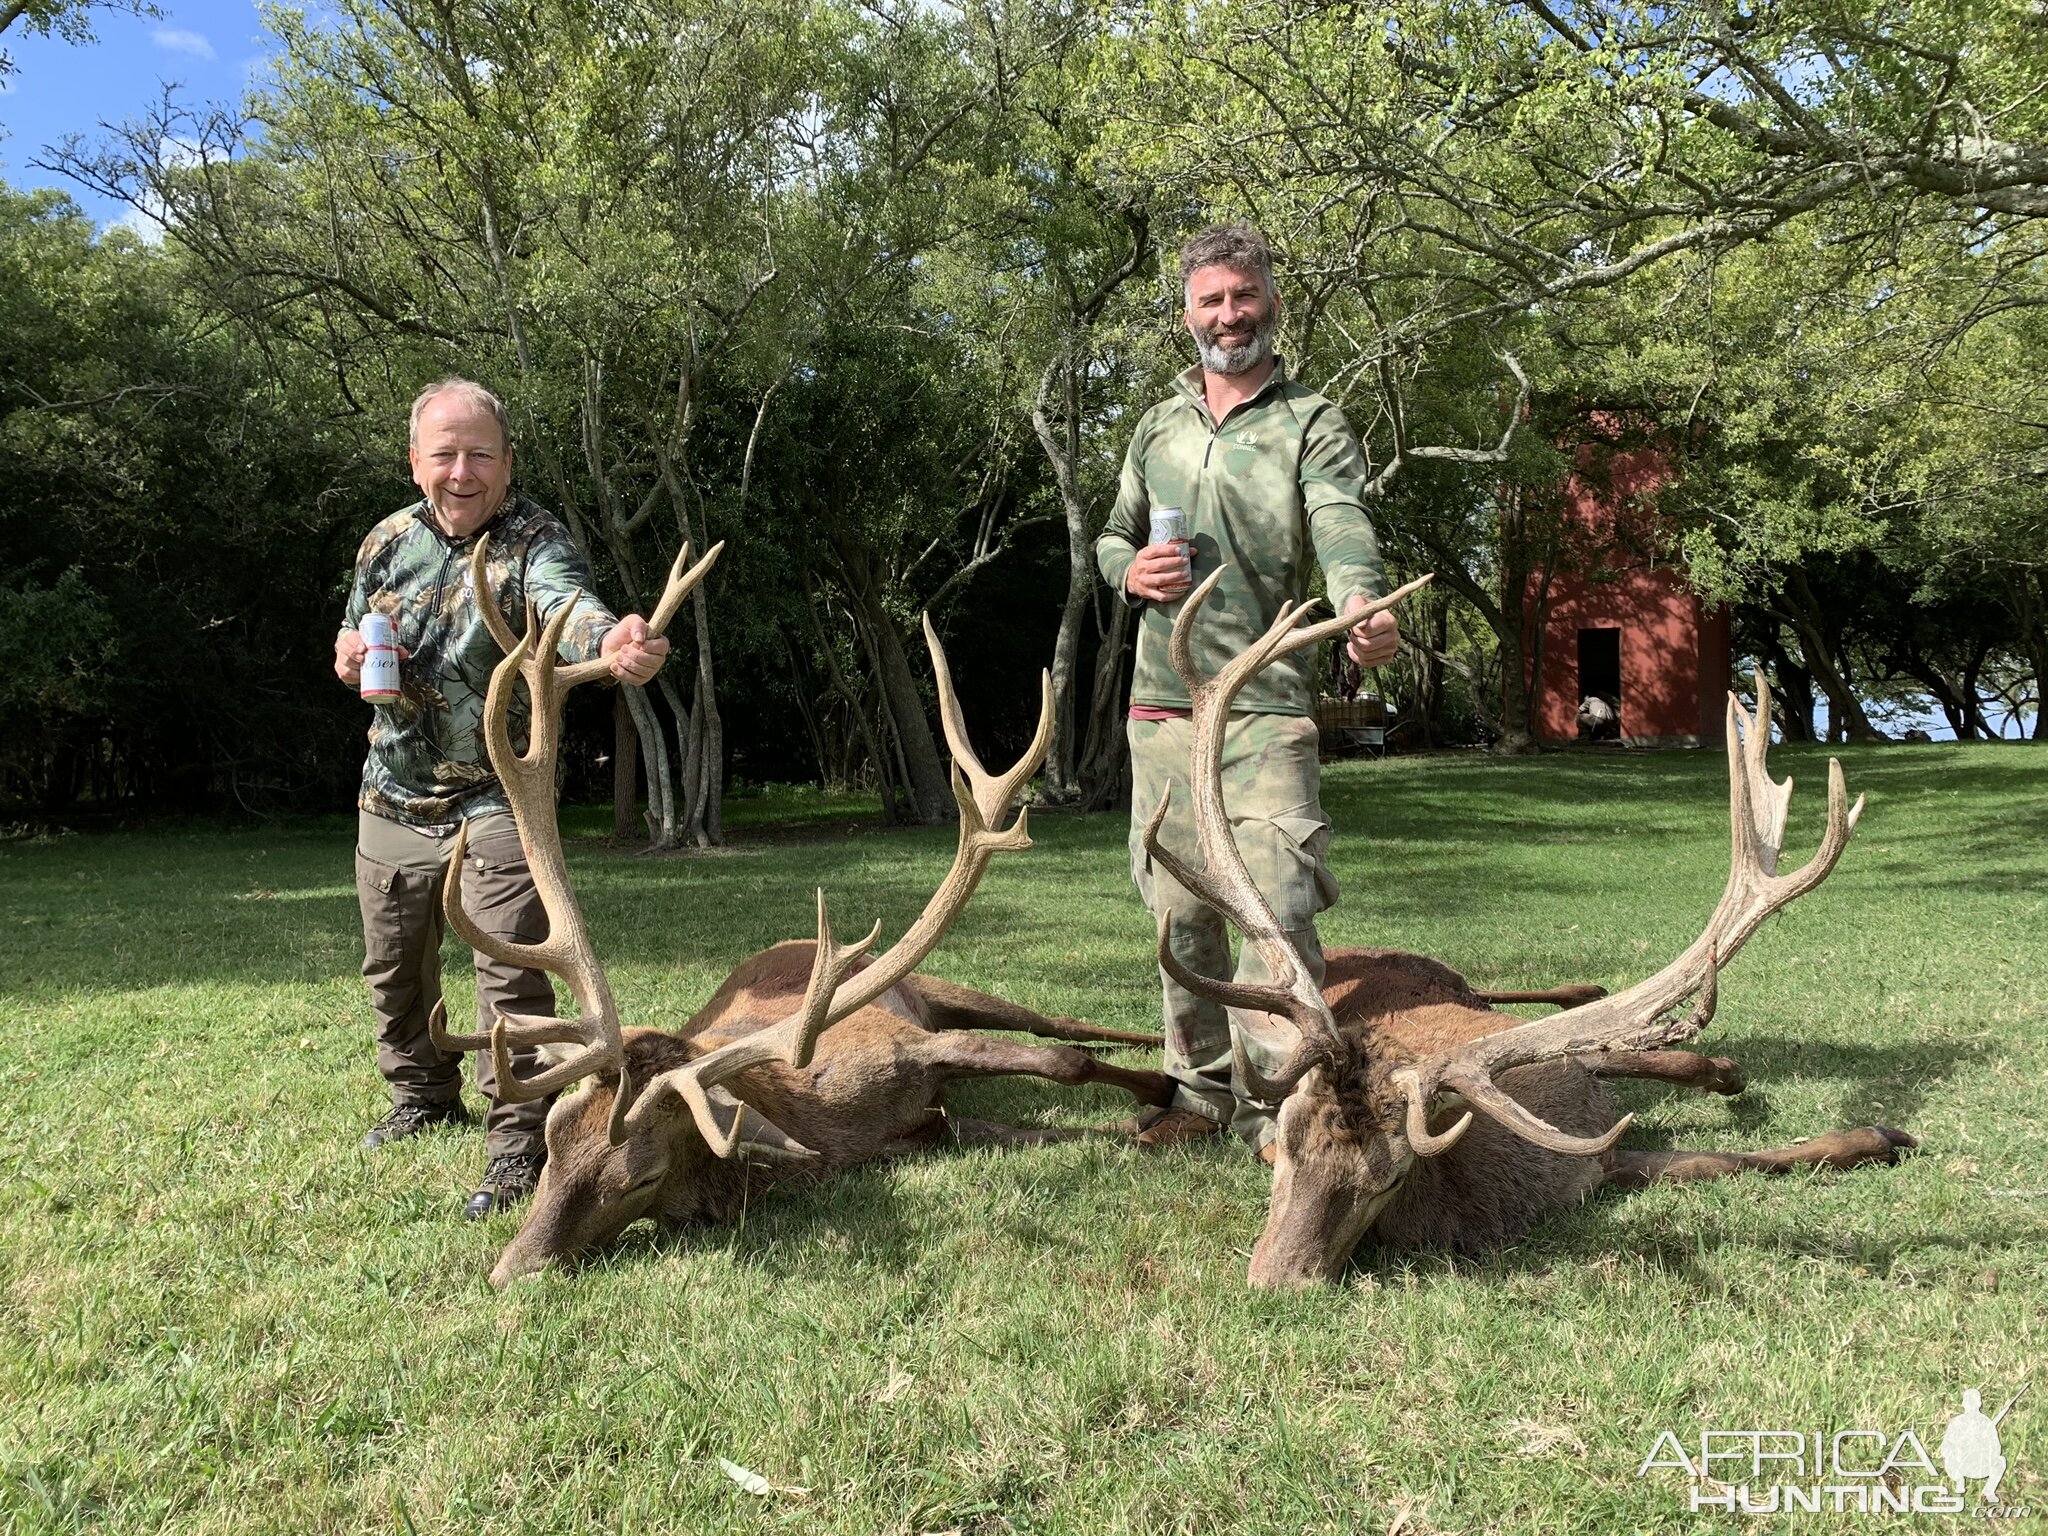 Argentina Hunt Red Stag